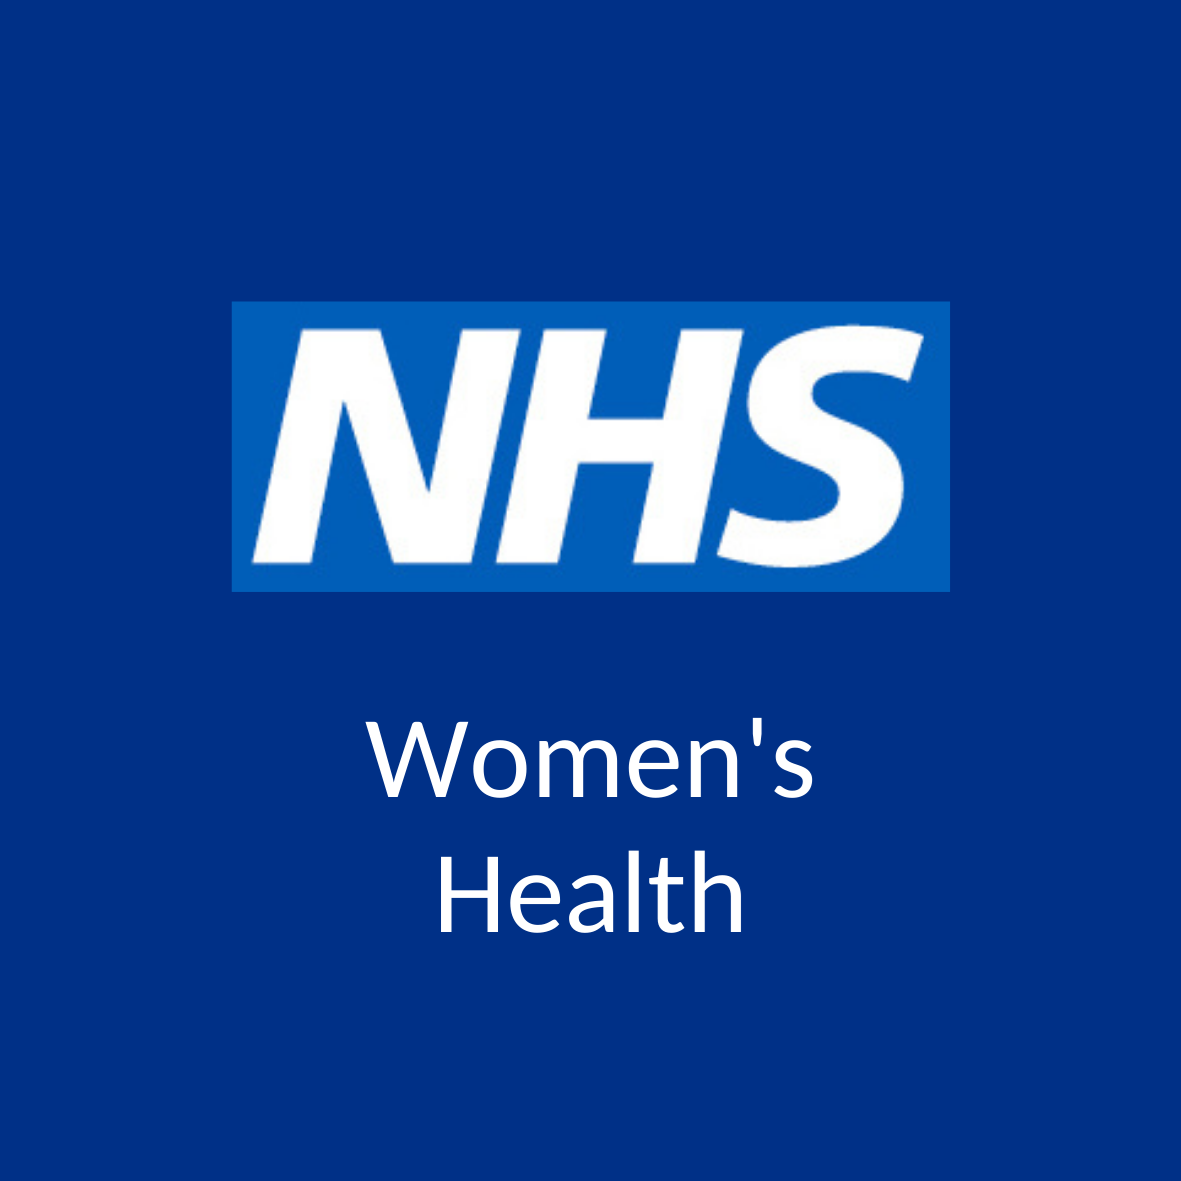 NHS Logo and Words Women's Health